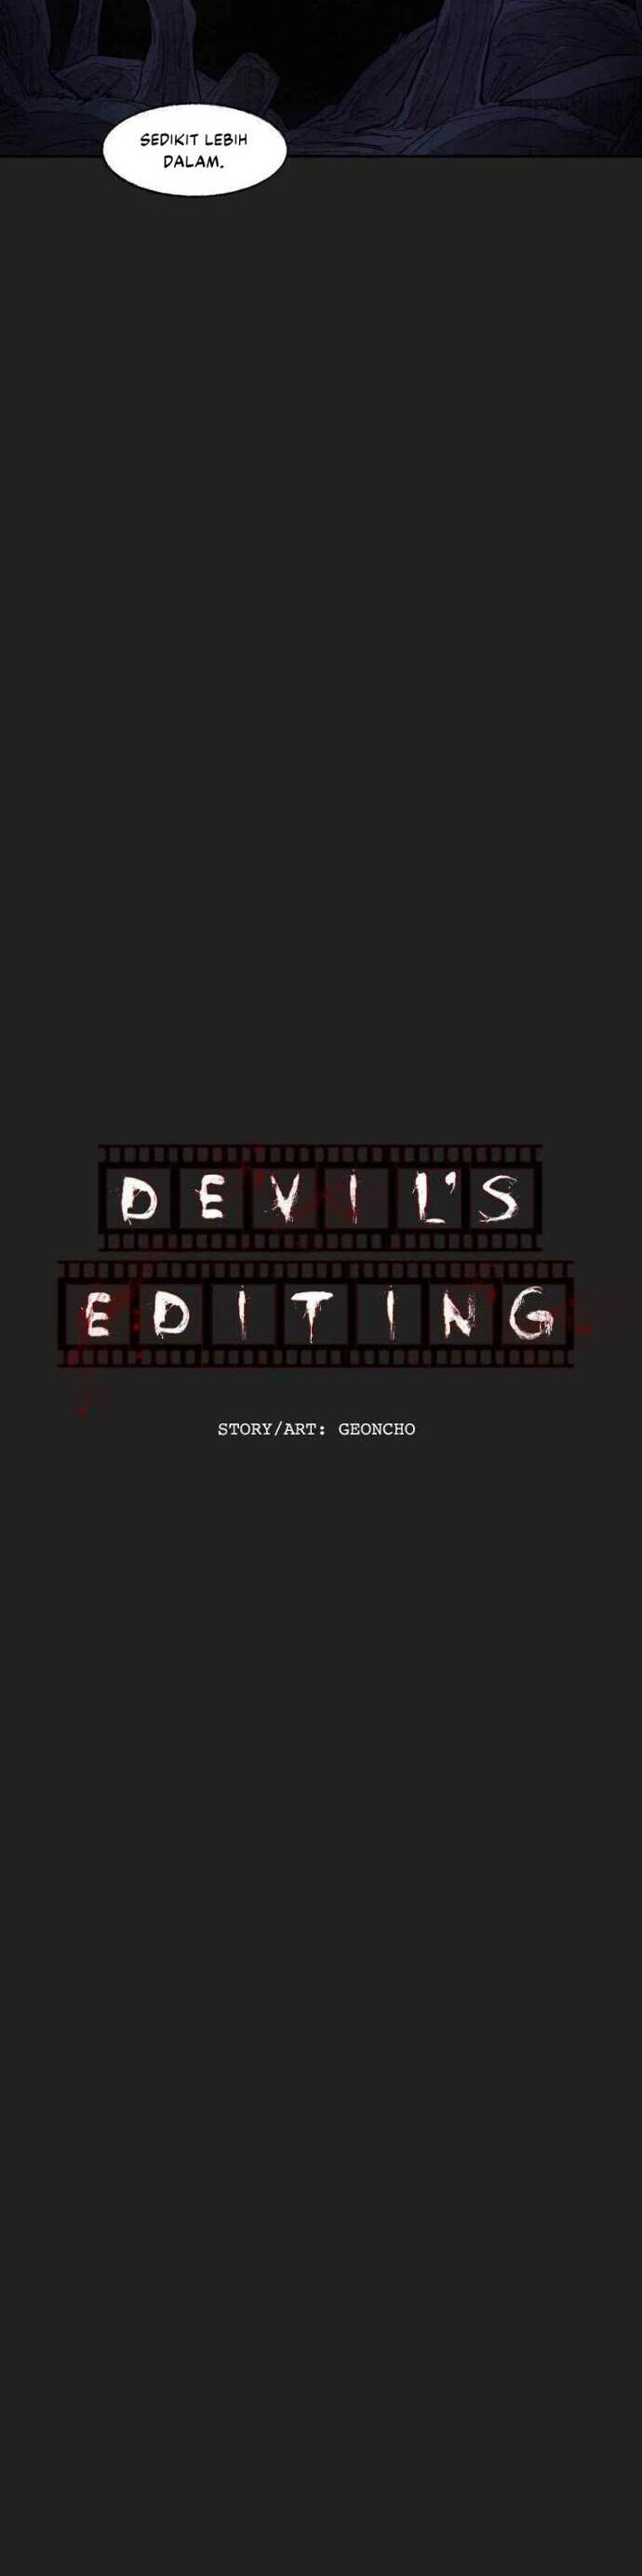 Devil’s Editing Chapter 05